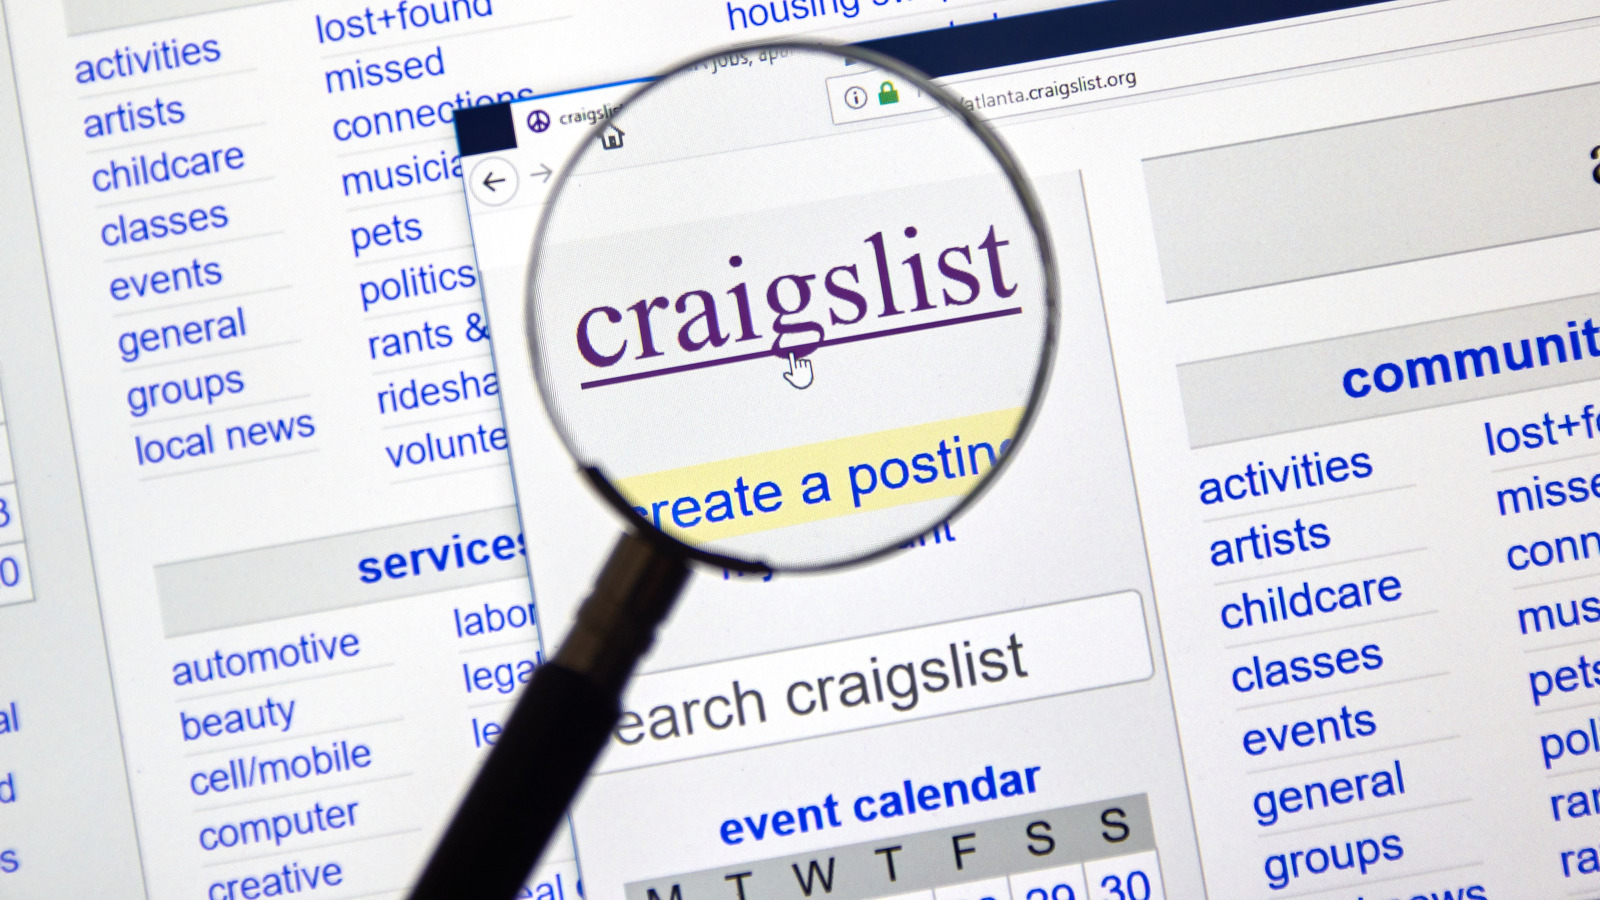 5 Common Scams To Watch For When Buying Used Motorcycles On Craigslist – SlashGear